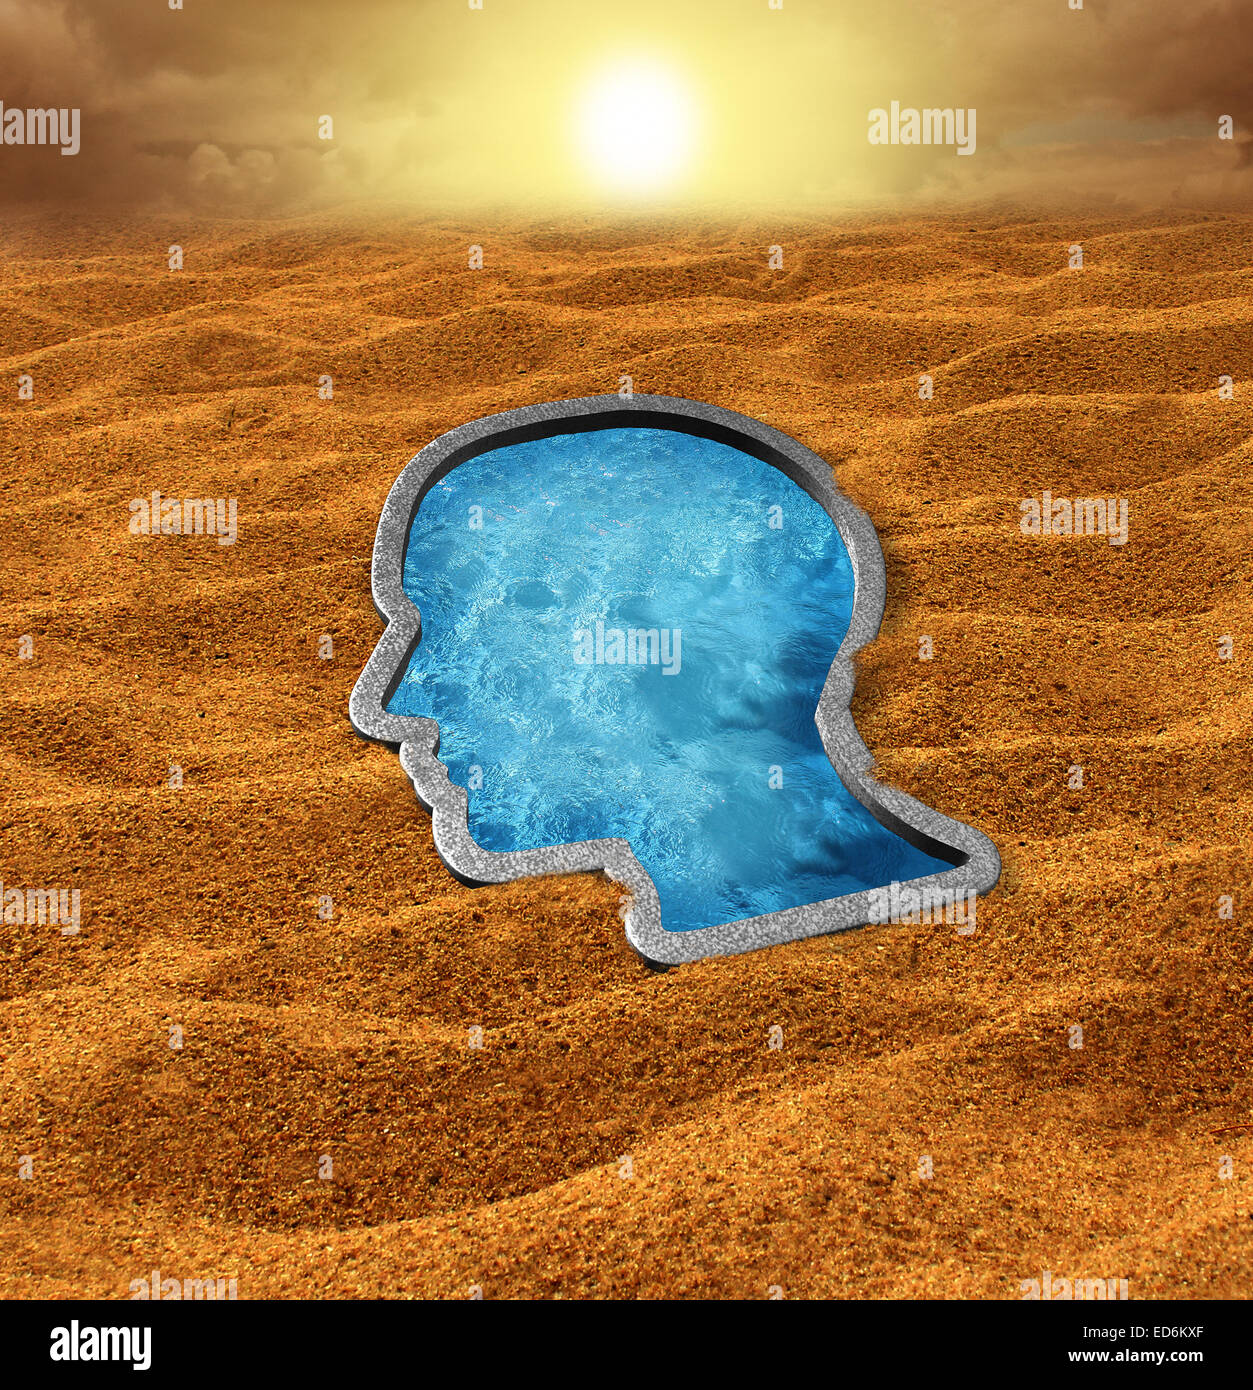 Human hope concept as a dry hot desert with a cool swimming pool oasis shaped as a human face as a concept and metaphor for belief faith and salvation from the challenges of life. Stock Photo